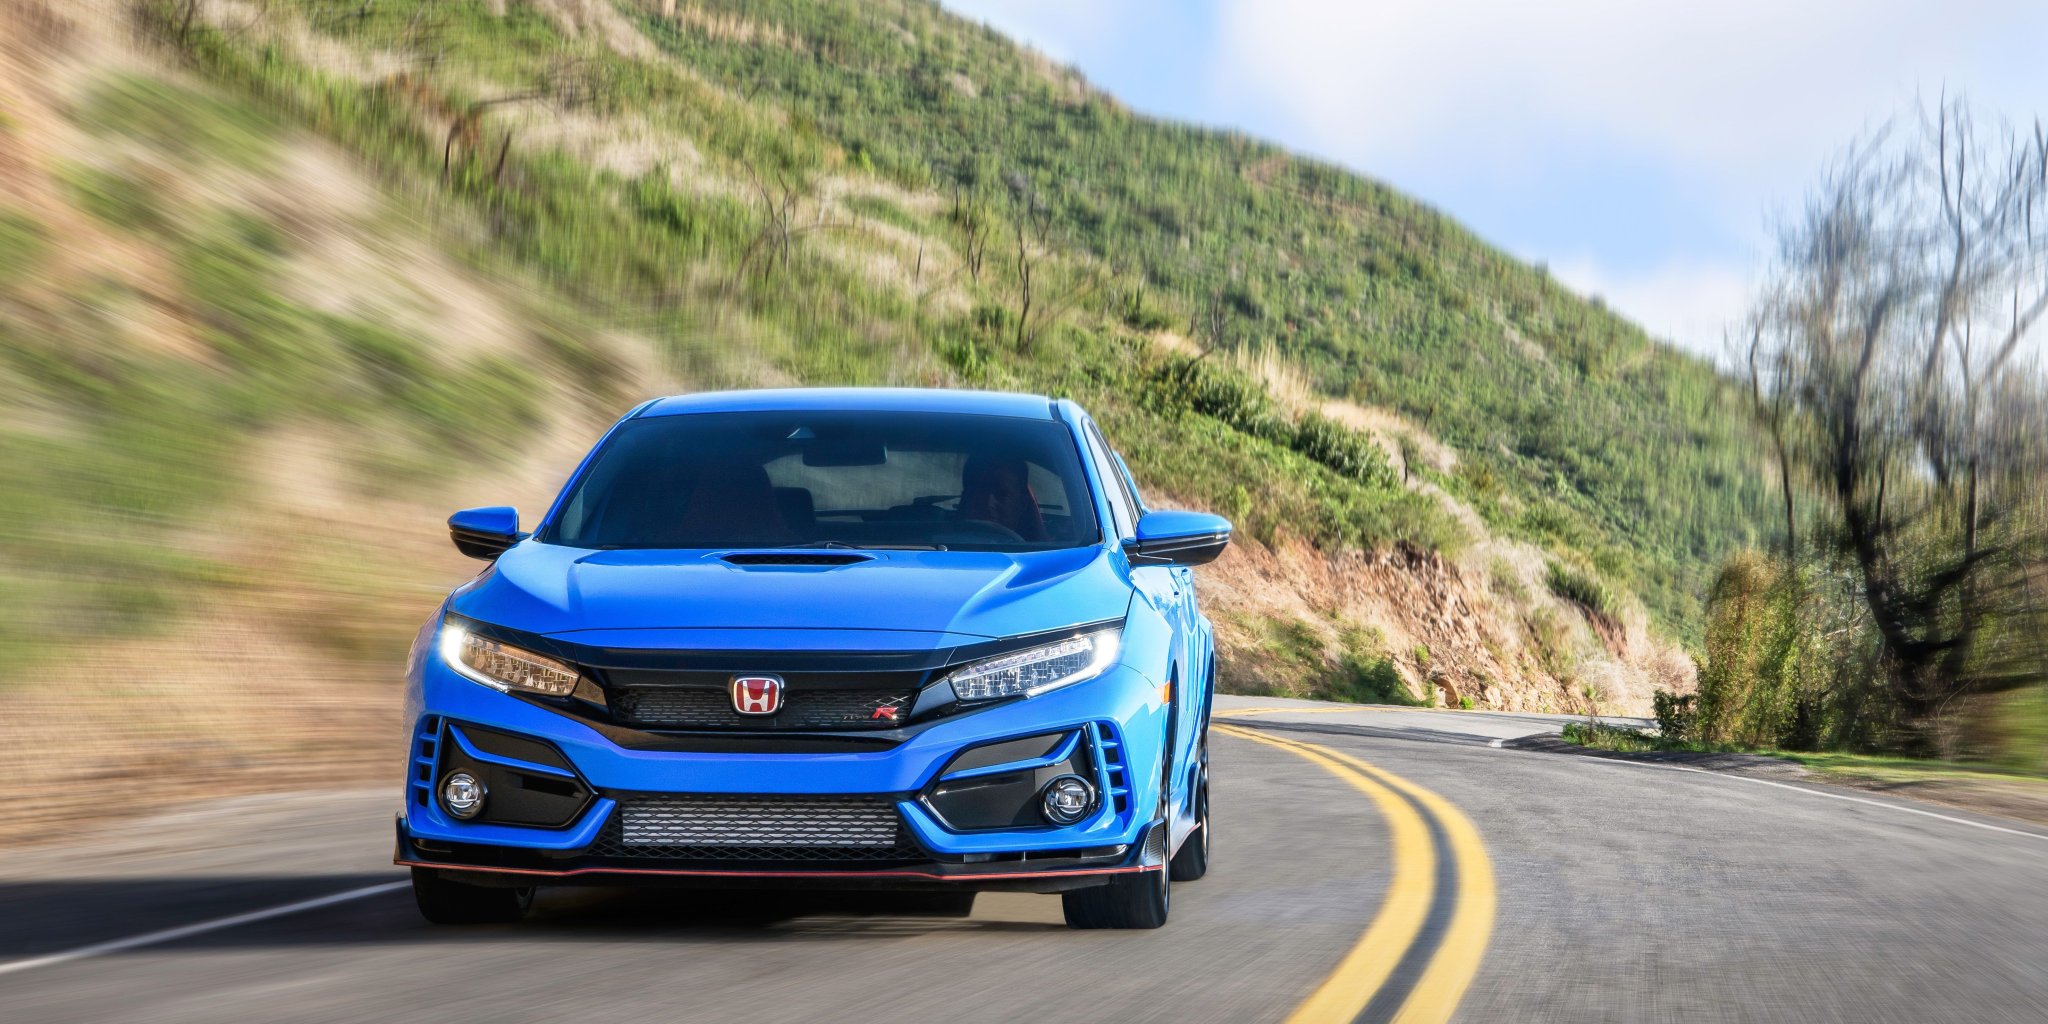 10 Reasons Why The New Civic Type R Is Best Budget Sports Car On The Market